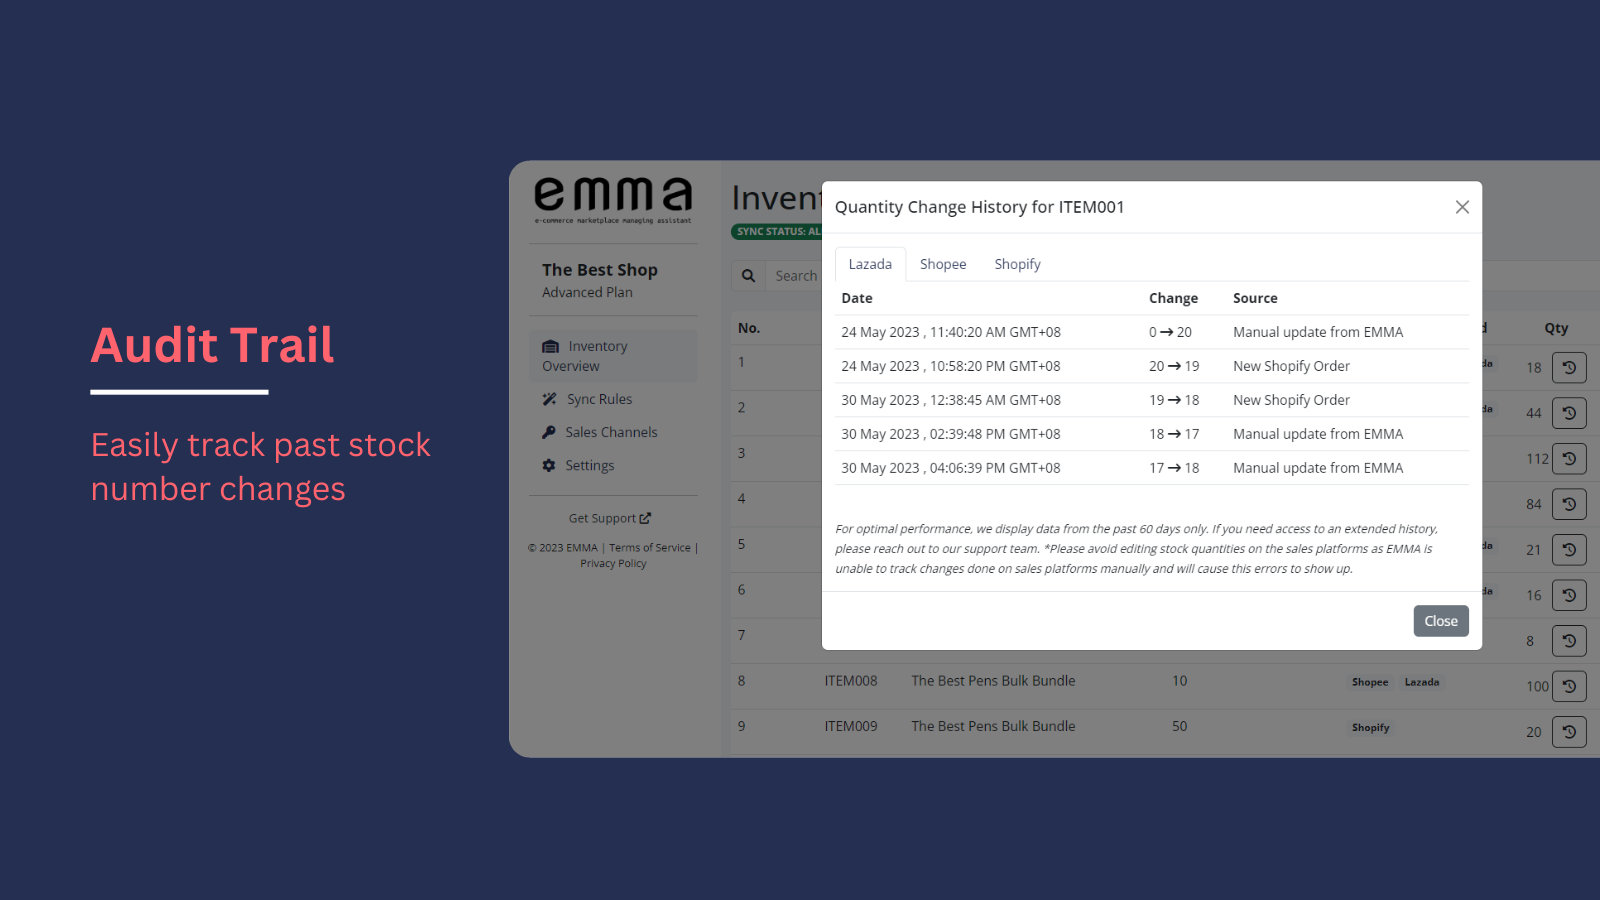 Audit Trail - Easily track past stock number changes